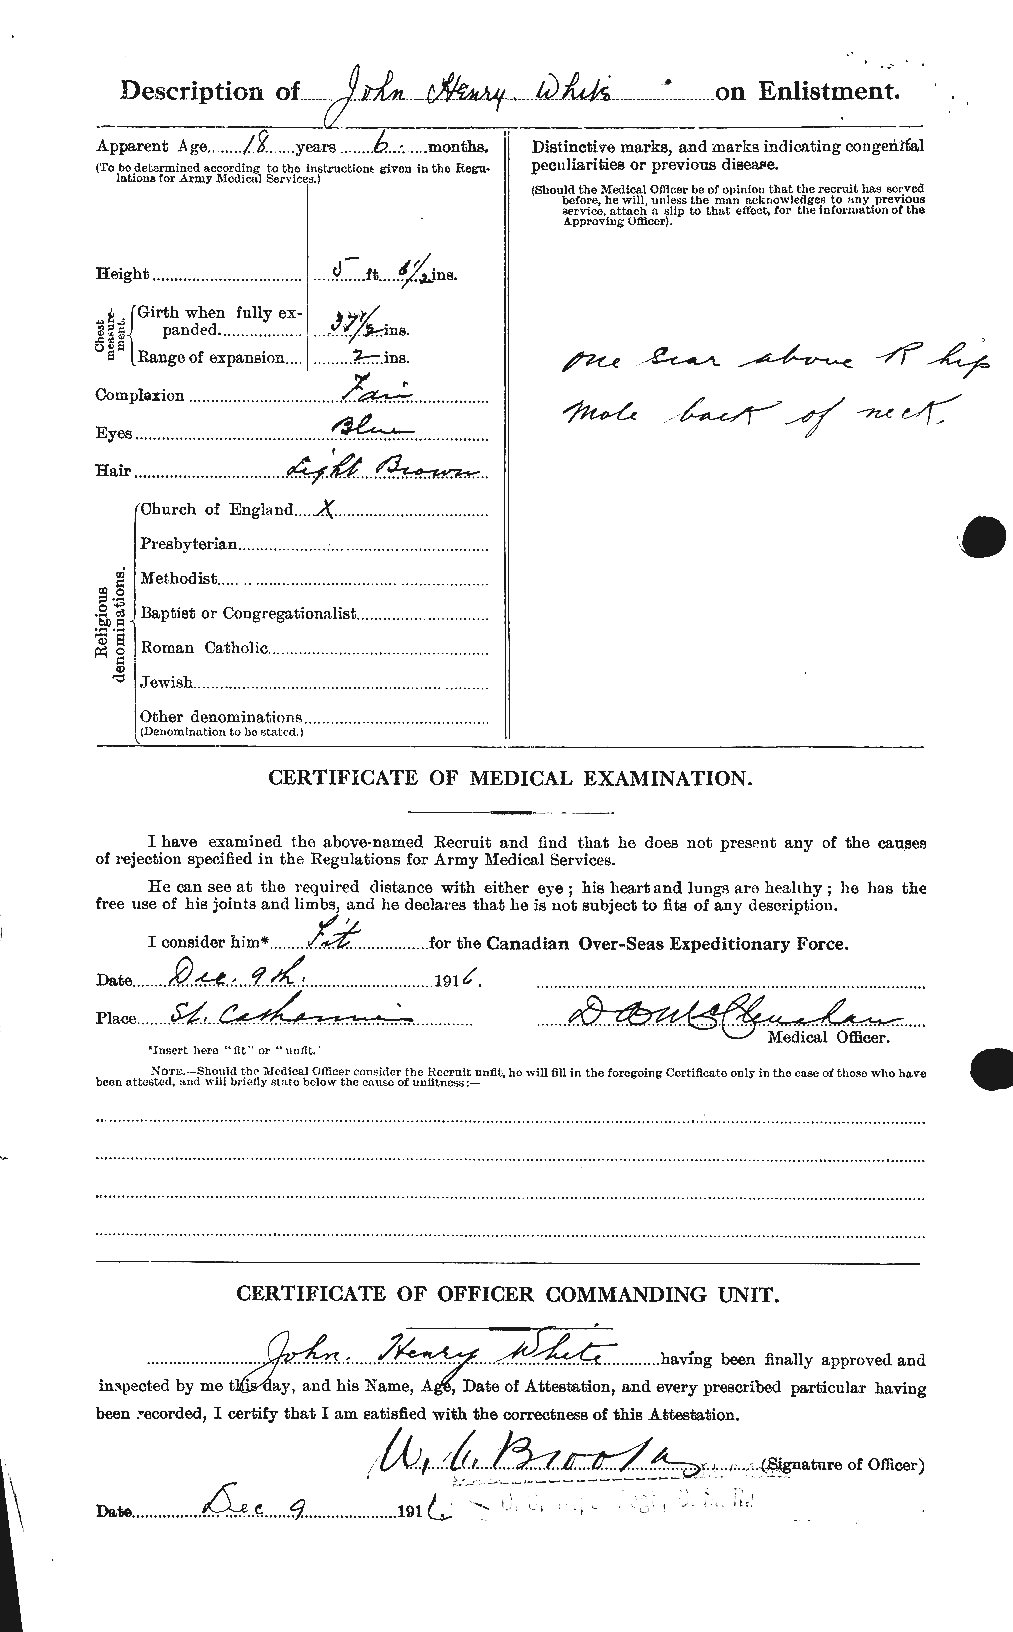 Personnel Records of the First World War - CEF 671568b